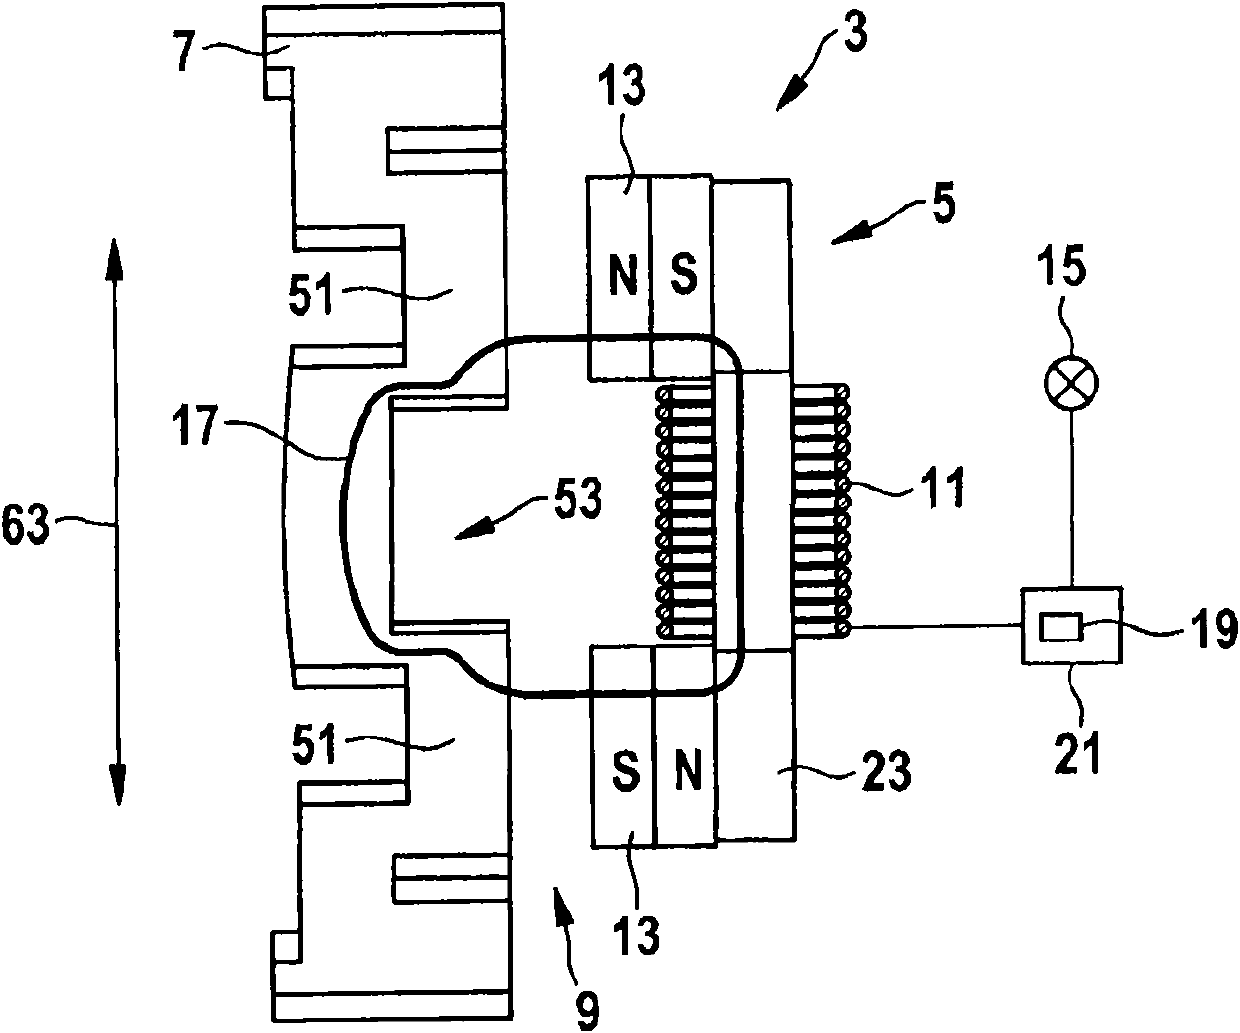 Machine tool with generator for passive power generation